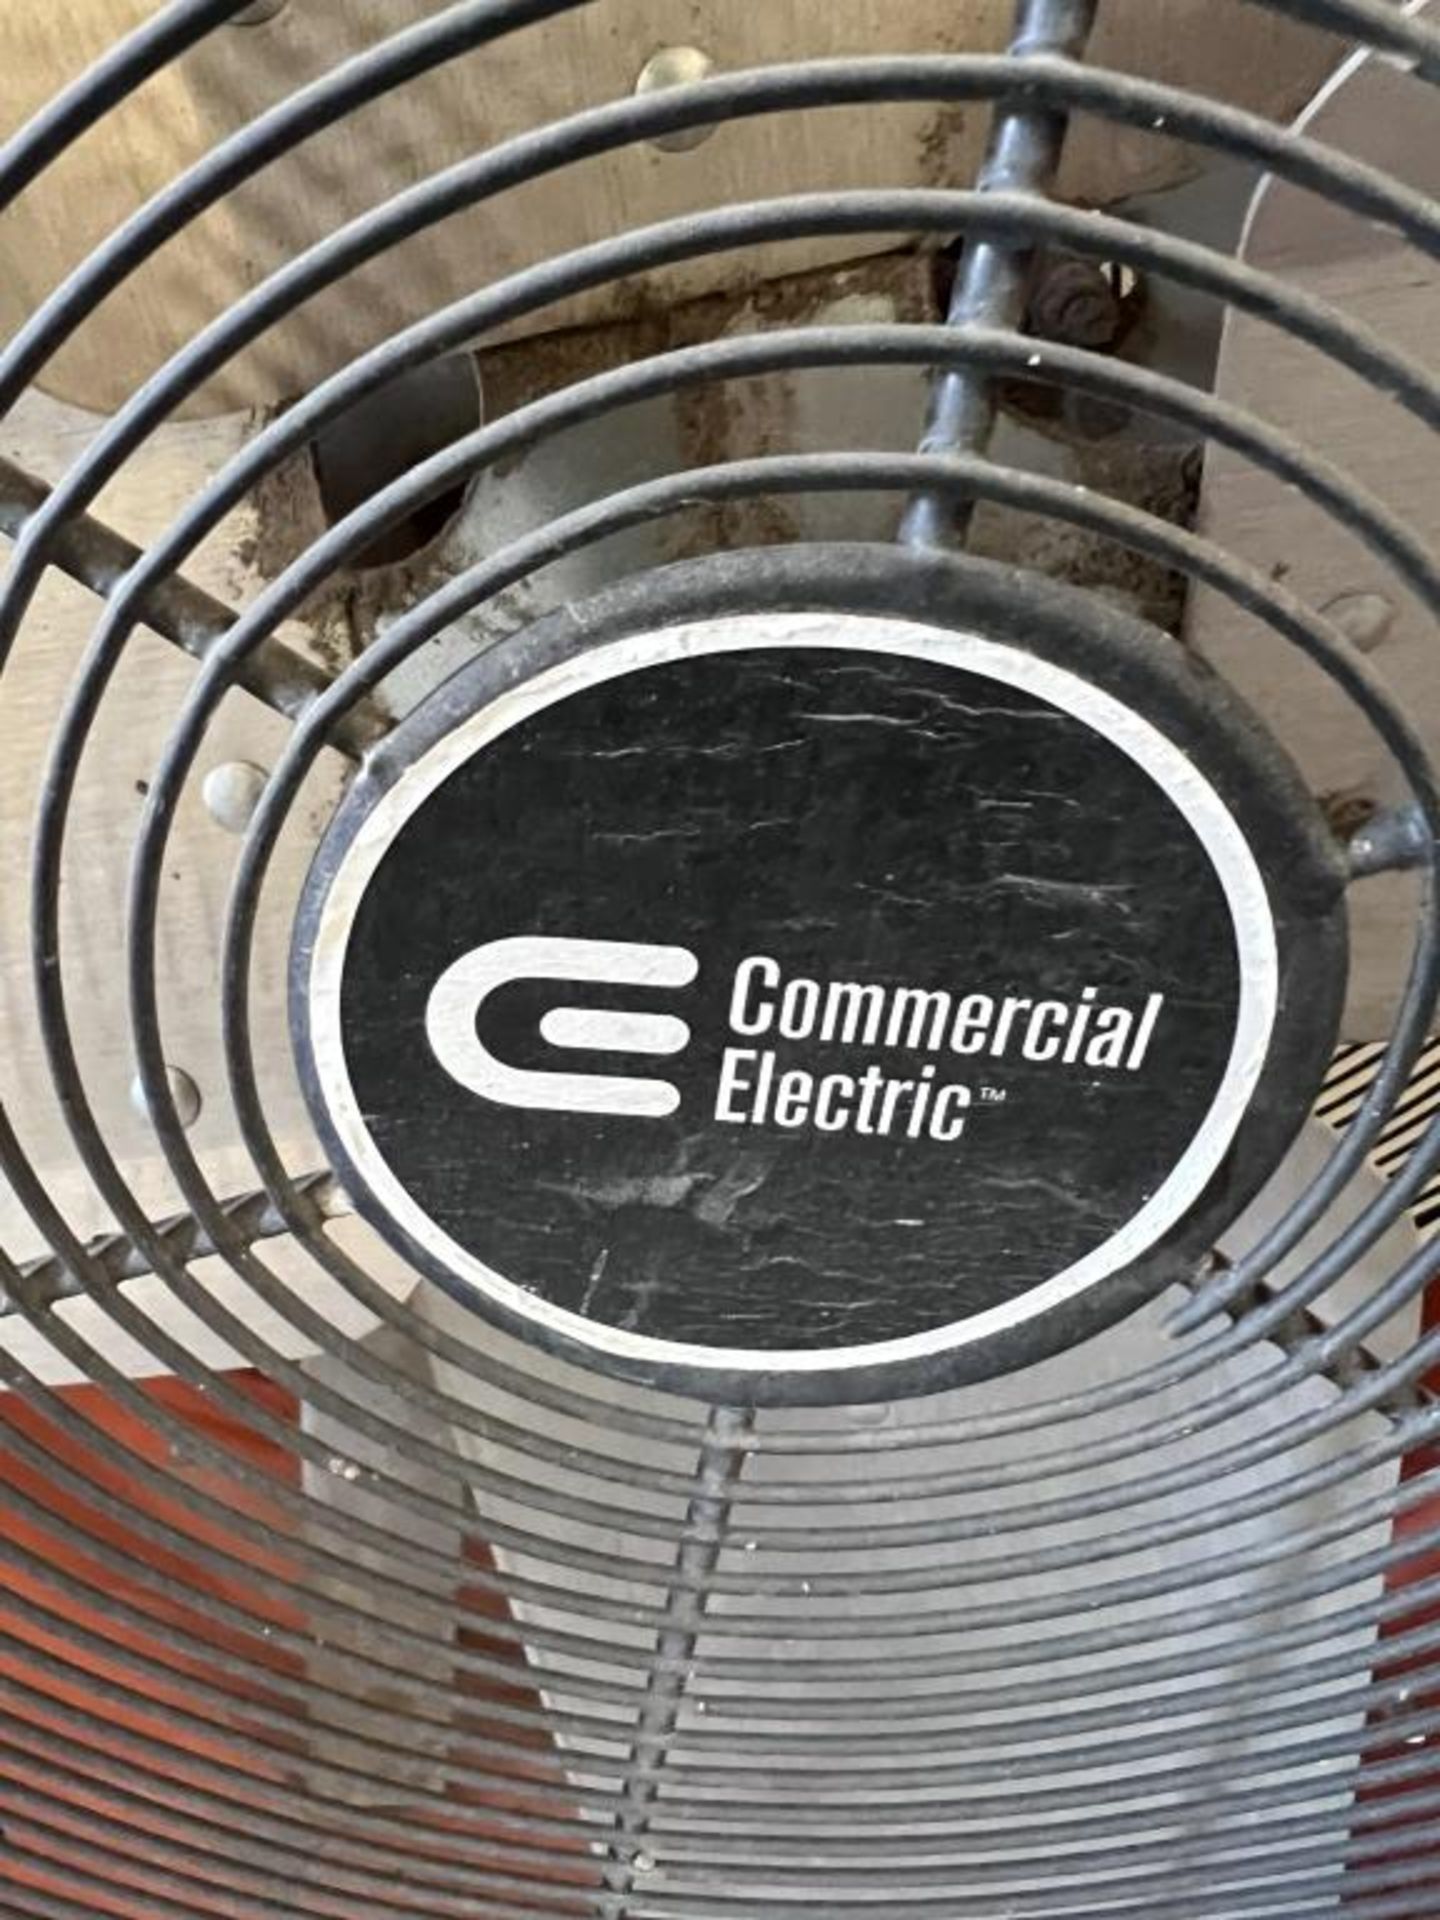 Commercial Electric Turbo Floor Fan - Image 2 of 2